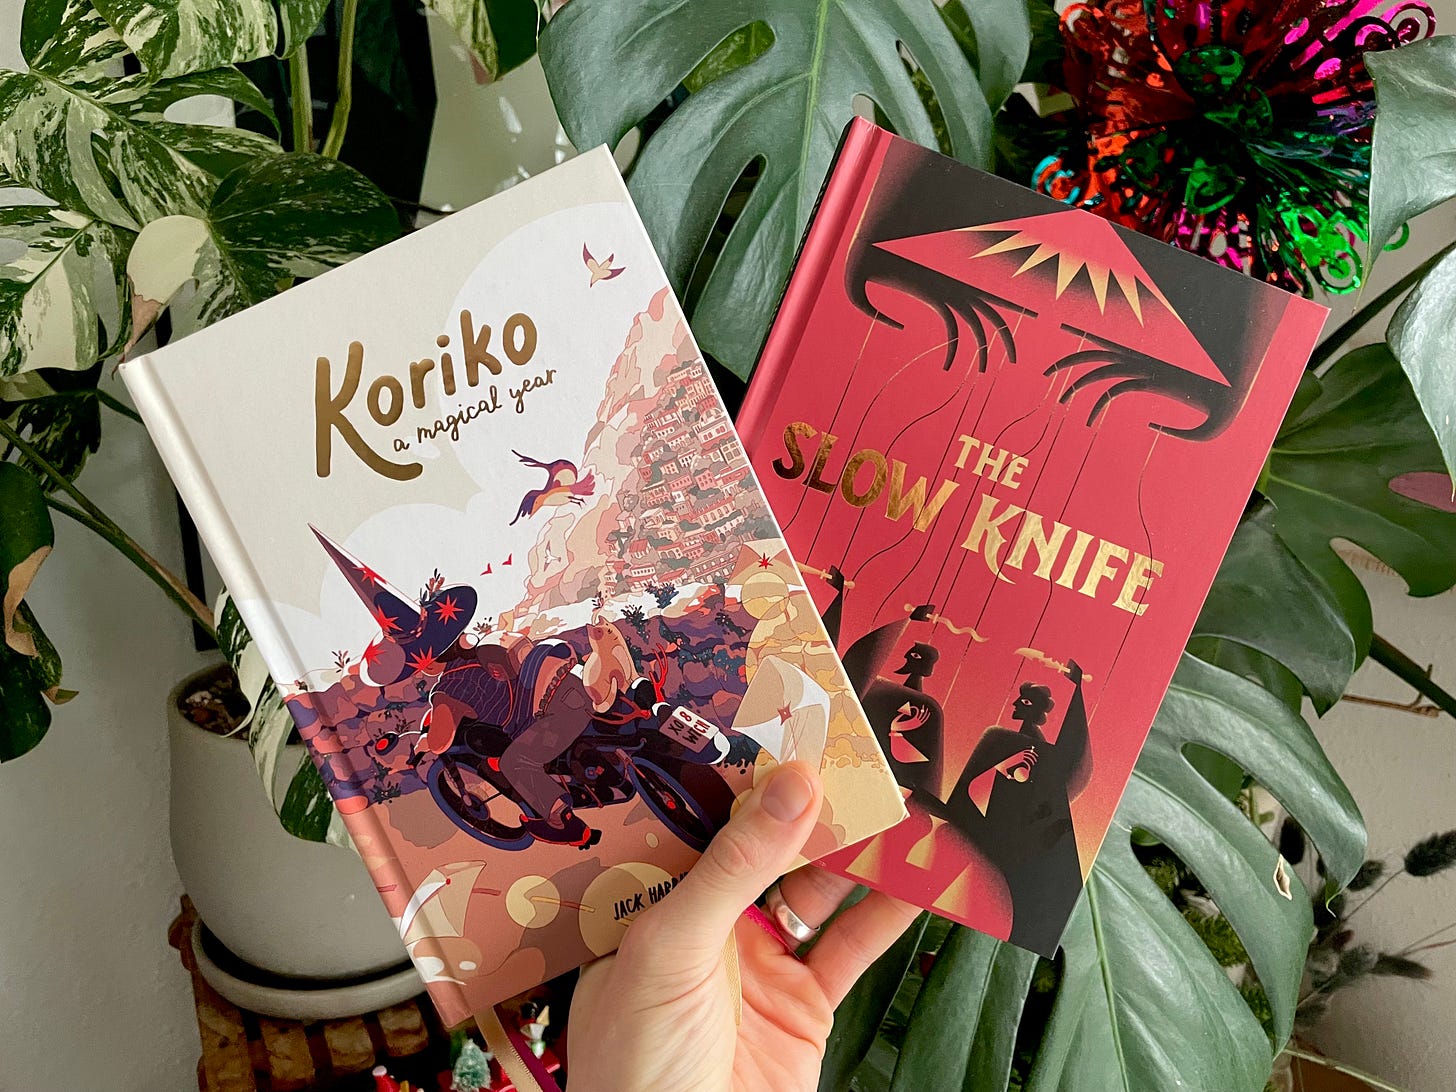 A photo of two books: Koriko and The Slow Knife